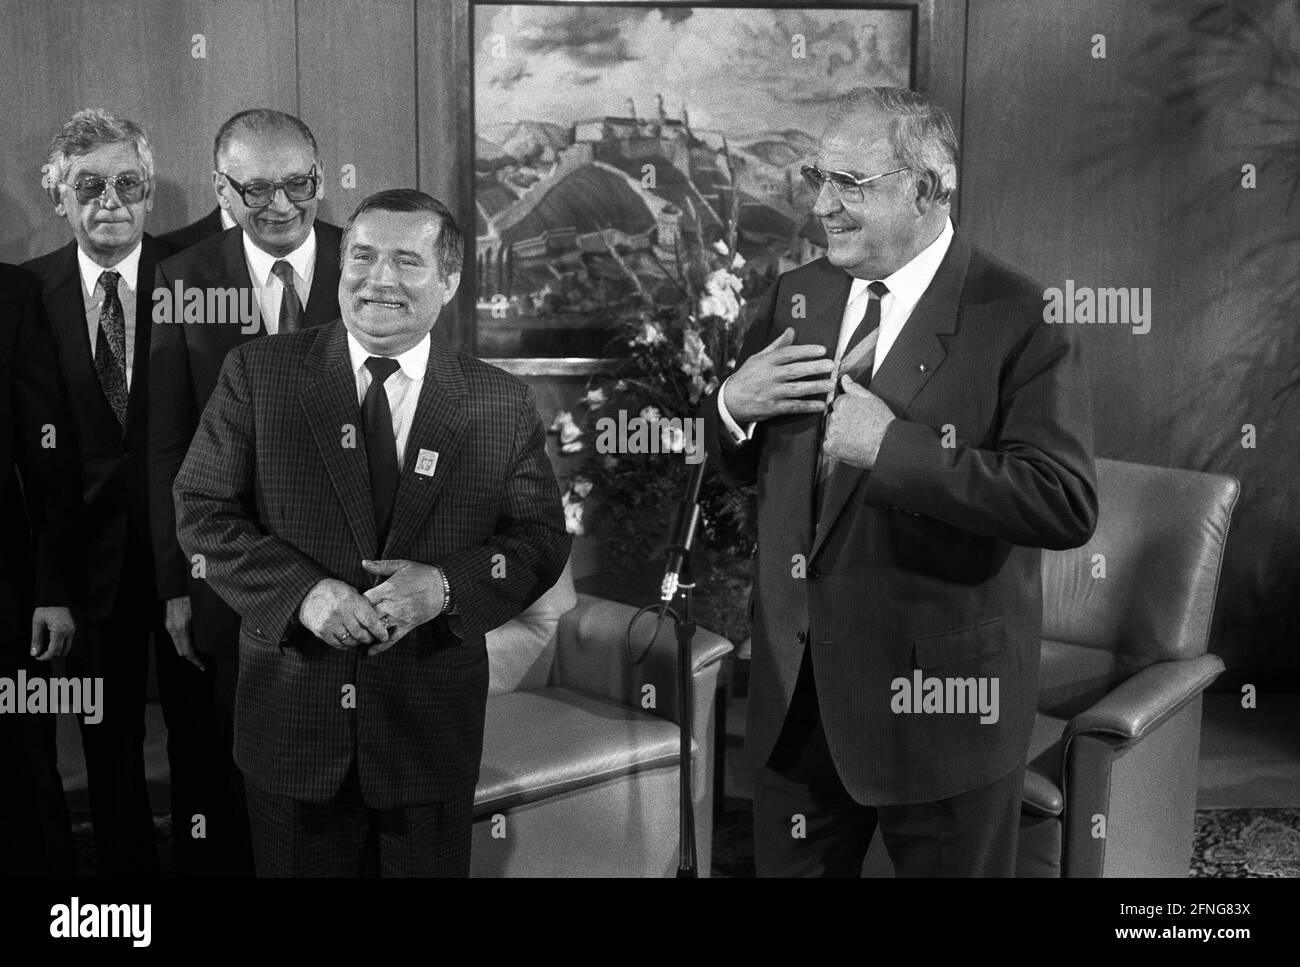 Germany, Bonn, 07.09.1989. Archive No: 08-19-18 Visit of Lech Walesa, chairman of the Solidarno?? trade union Photo: Lech Walesa and Chancellor Helmut Kohl at the Chancellery. [automated translation] Stock Photo